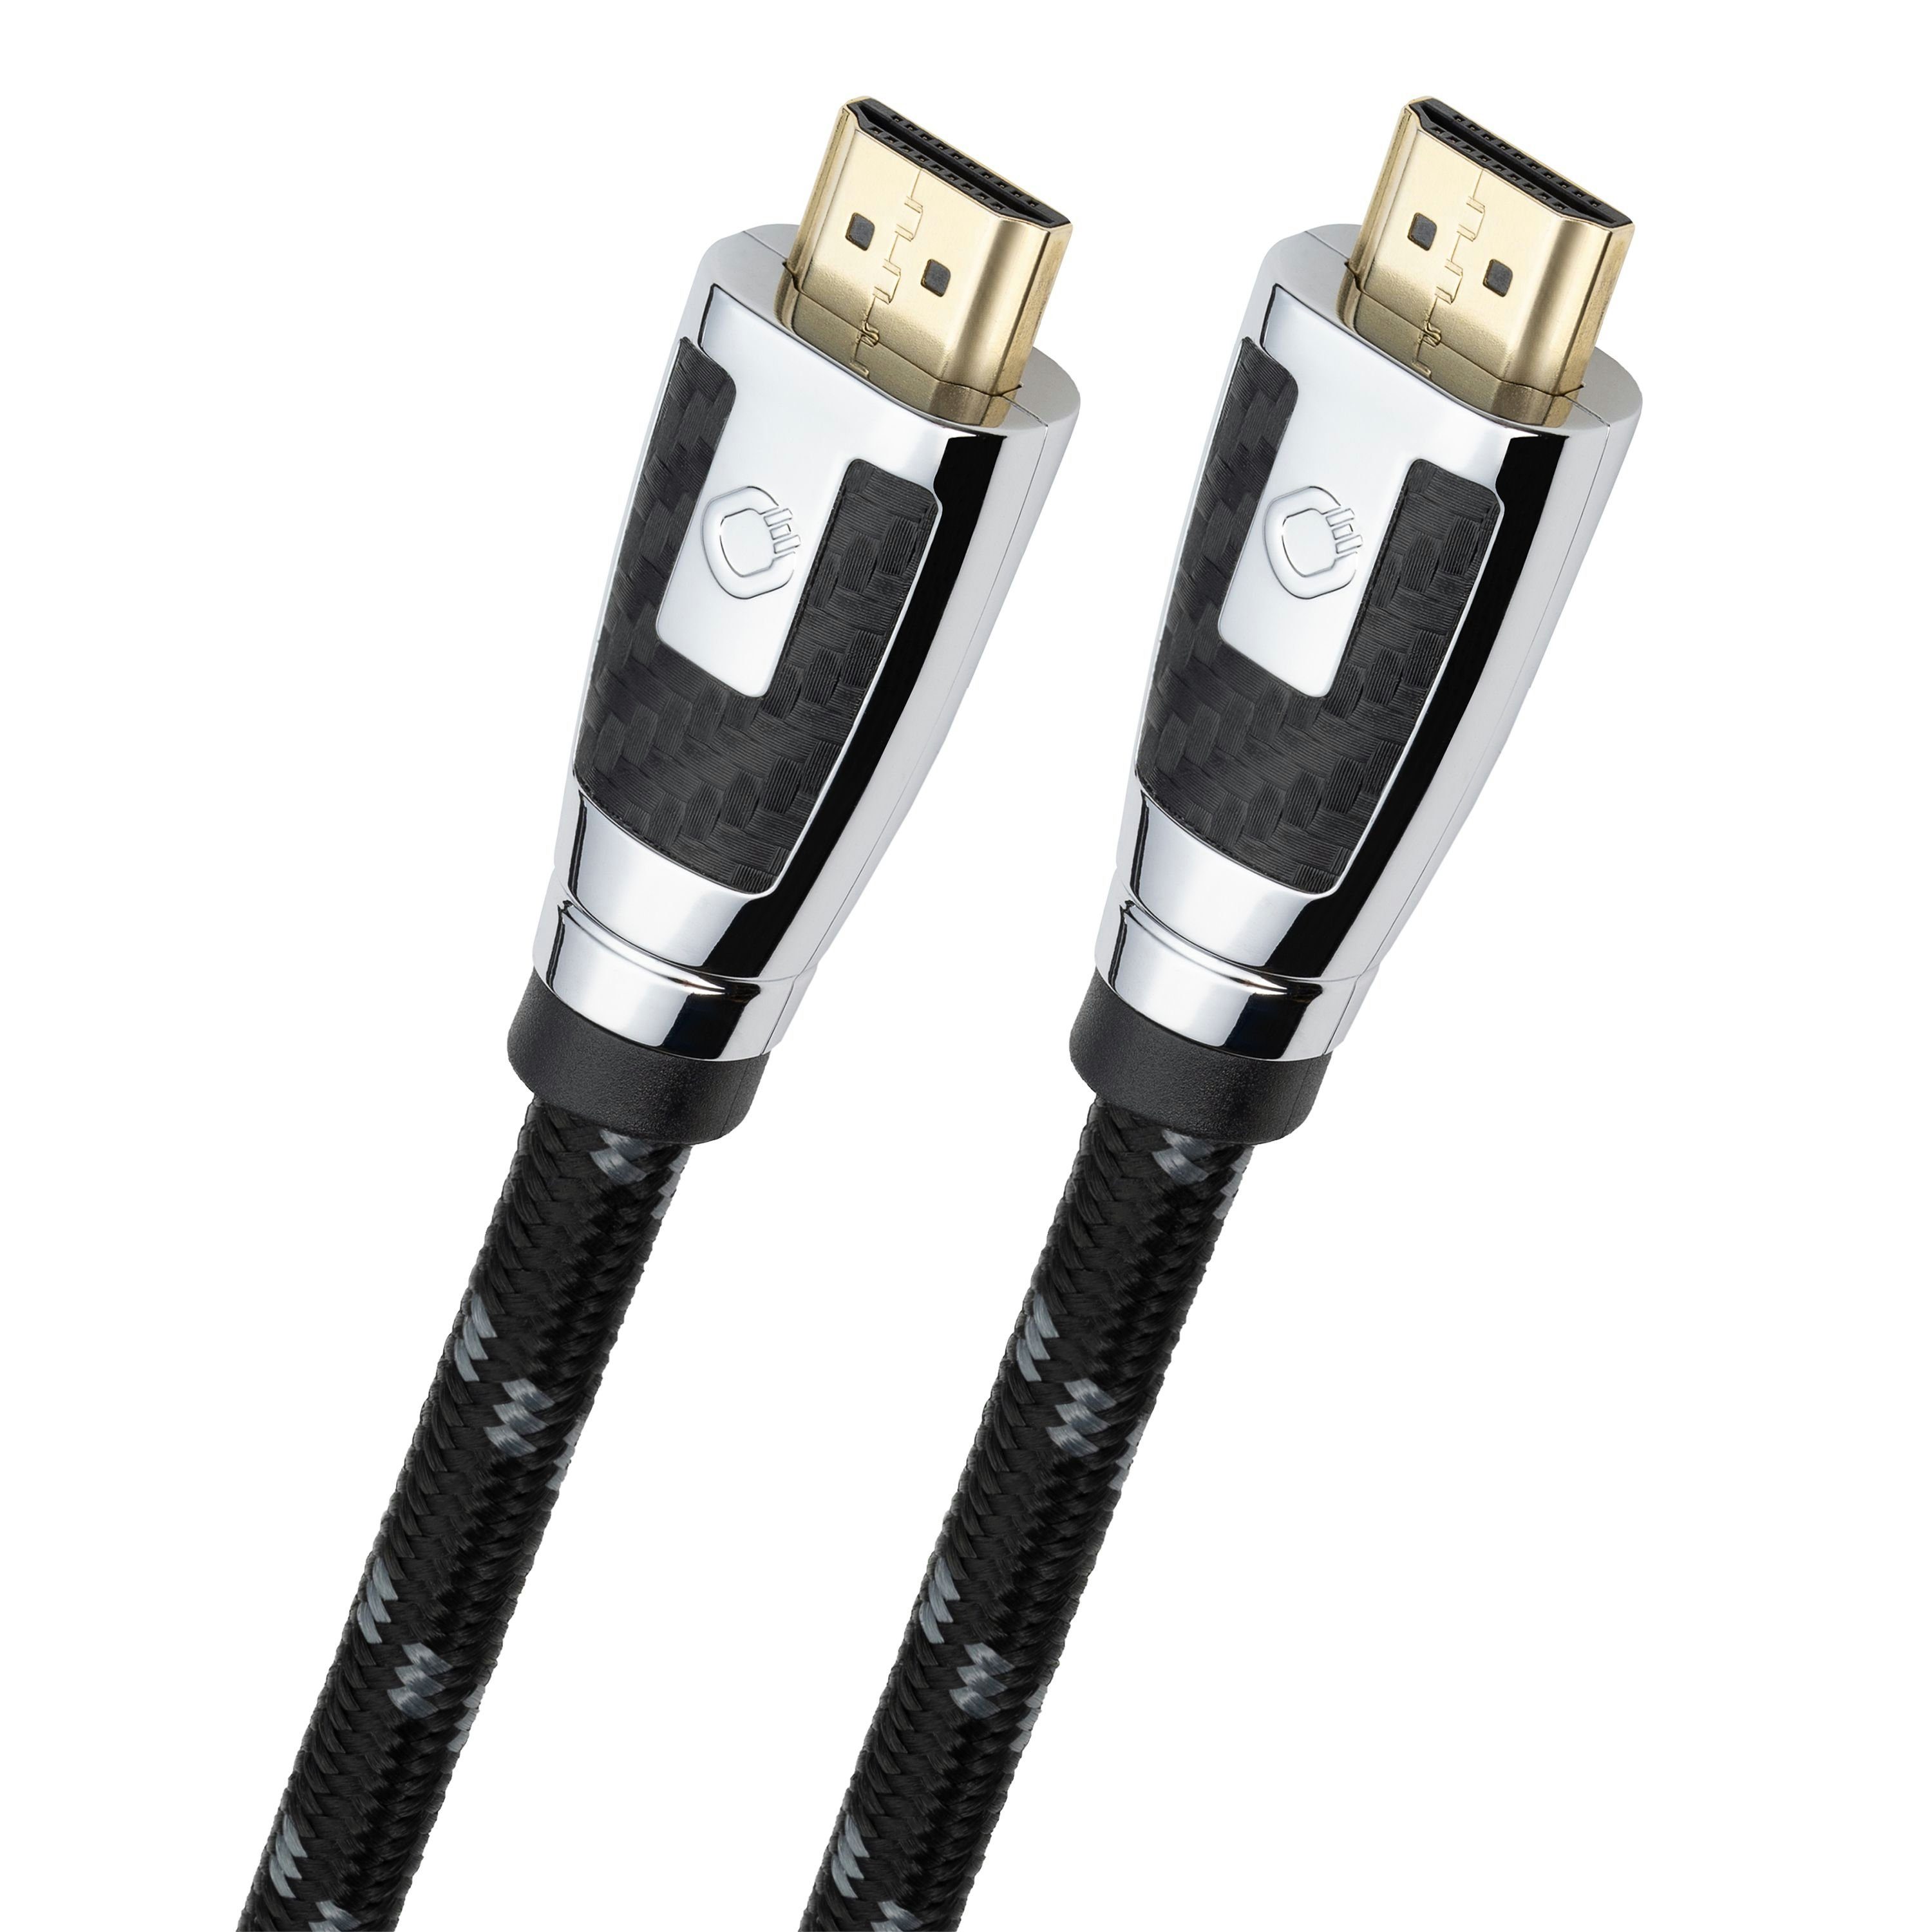 Oehlbach »Carb Connect MKII - High Speed Ethernet HDMI Kabel - 4k Ultra HD  60Hz, 2160p - 21:9 CINEMA, 3D, HDR - HPOCC - 3,20 m« HDMI-Kabel, (320 cm)  online kaufen | OTTO